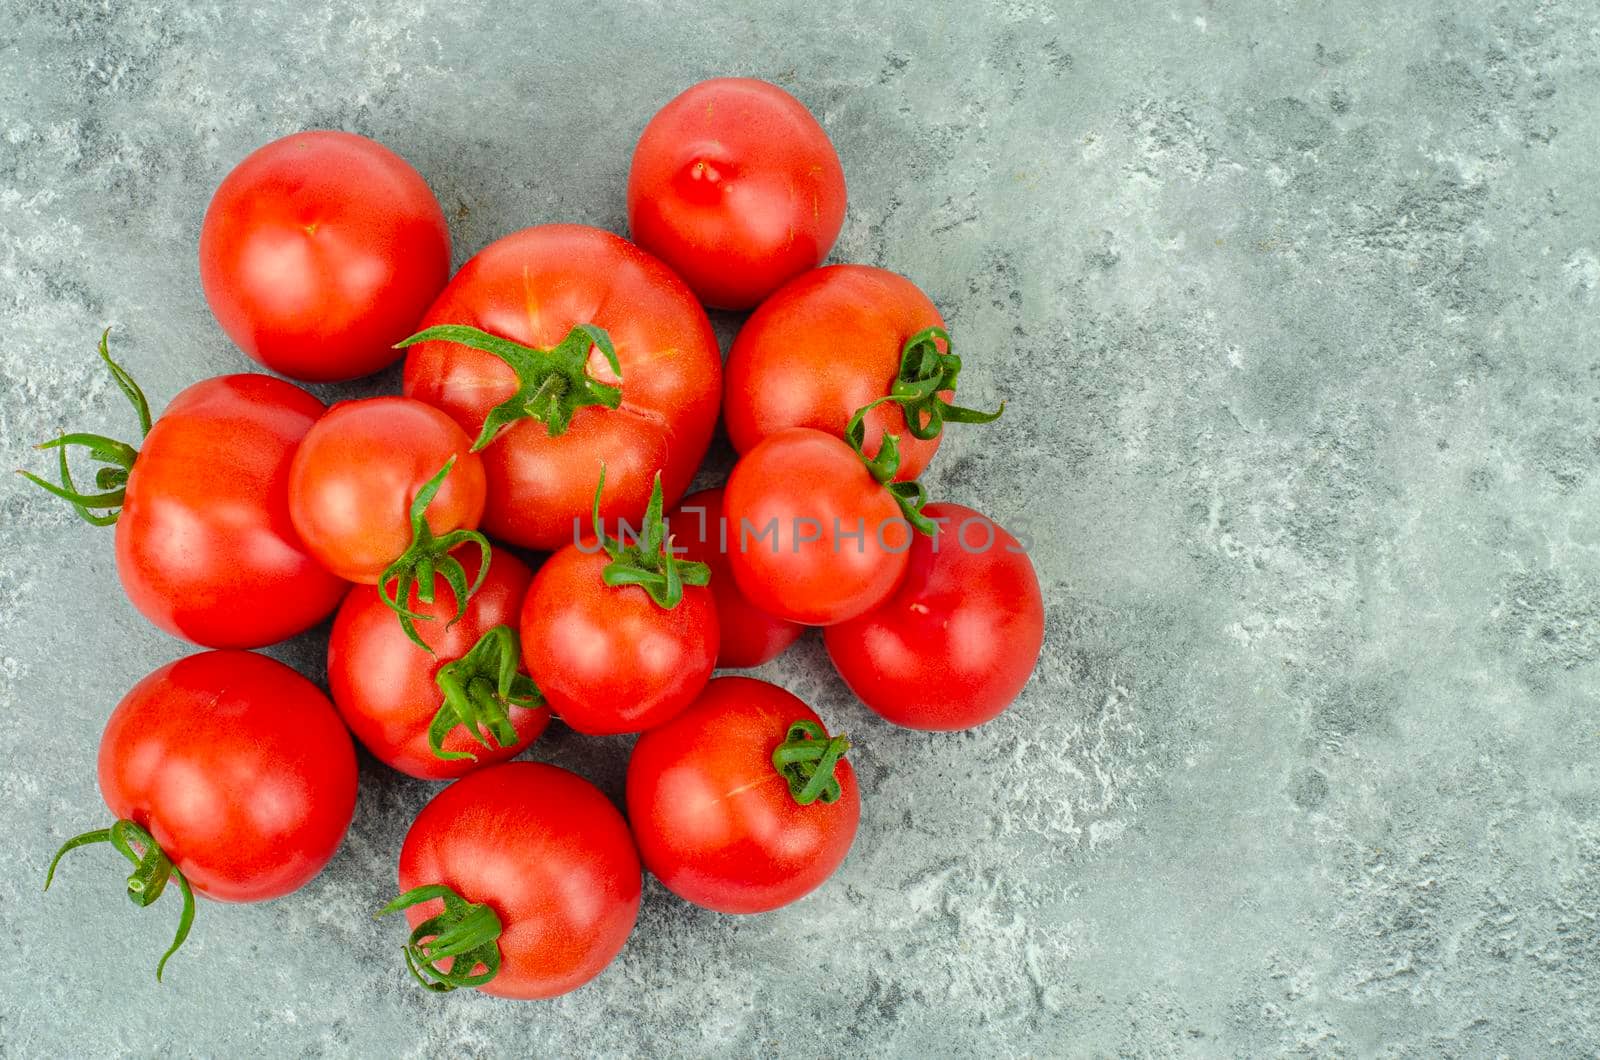 Bunch of ripe tomatoes on blue-gray background. Studio Photo by ArtCookStudio